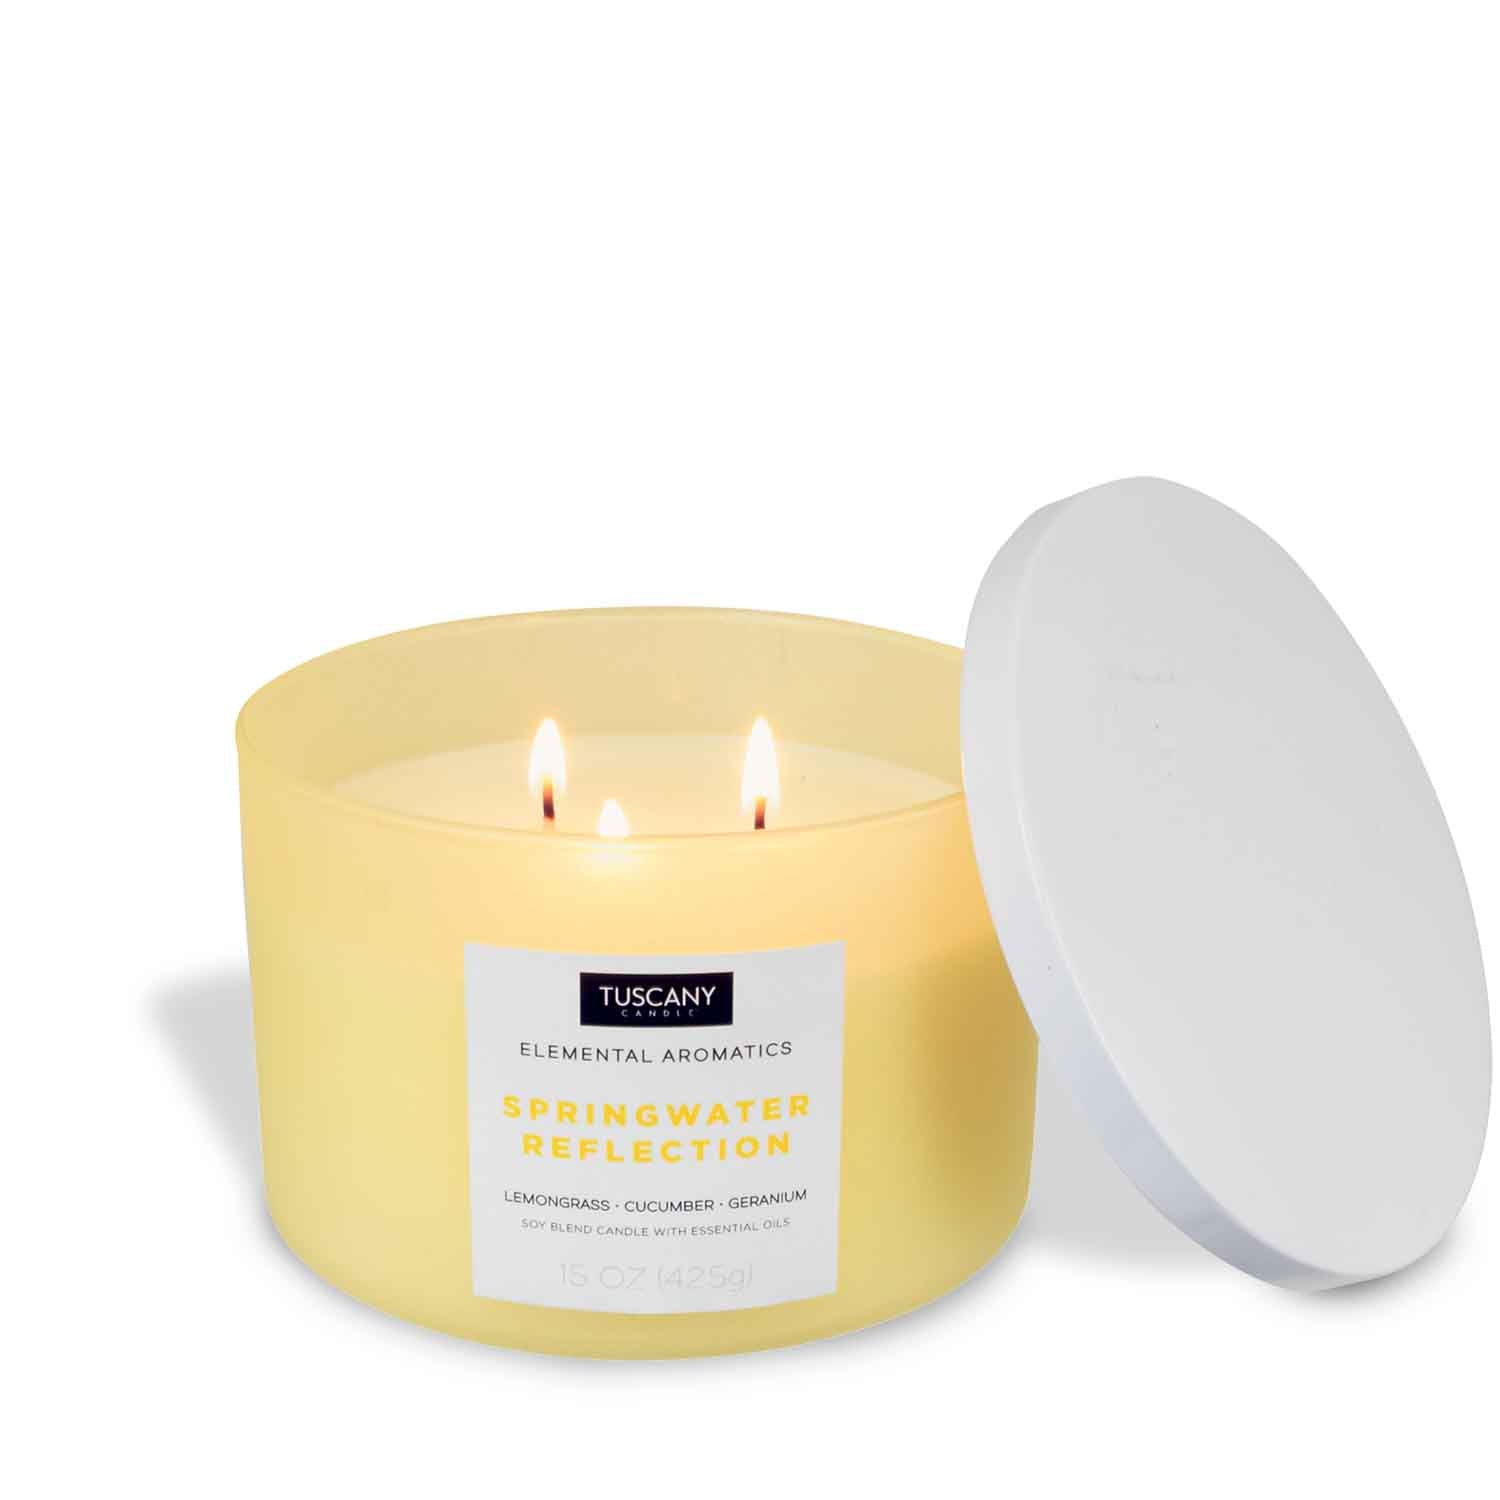 A Springwater Reflection-scented yellow candle with a white lid, made with a soy wax blend, on a white background by Tuscany Candle.